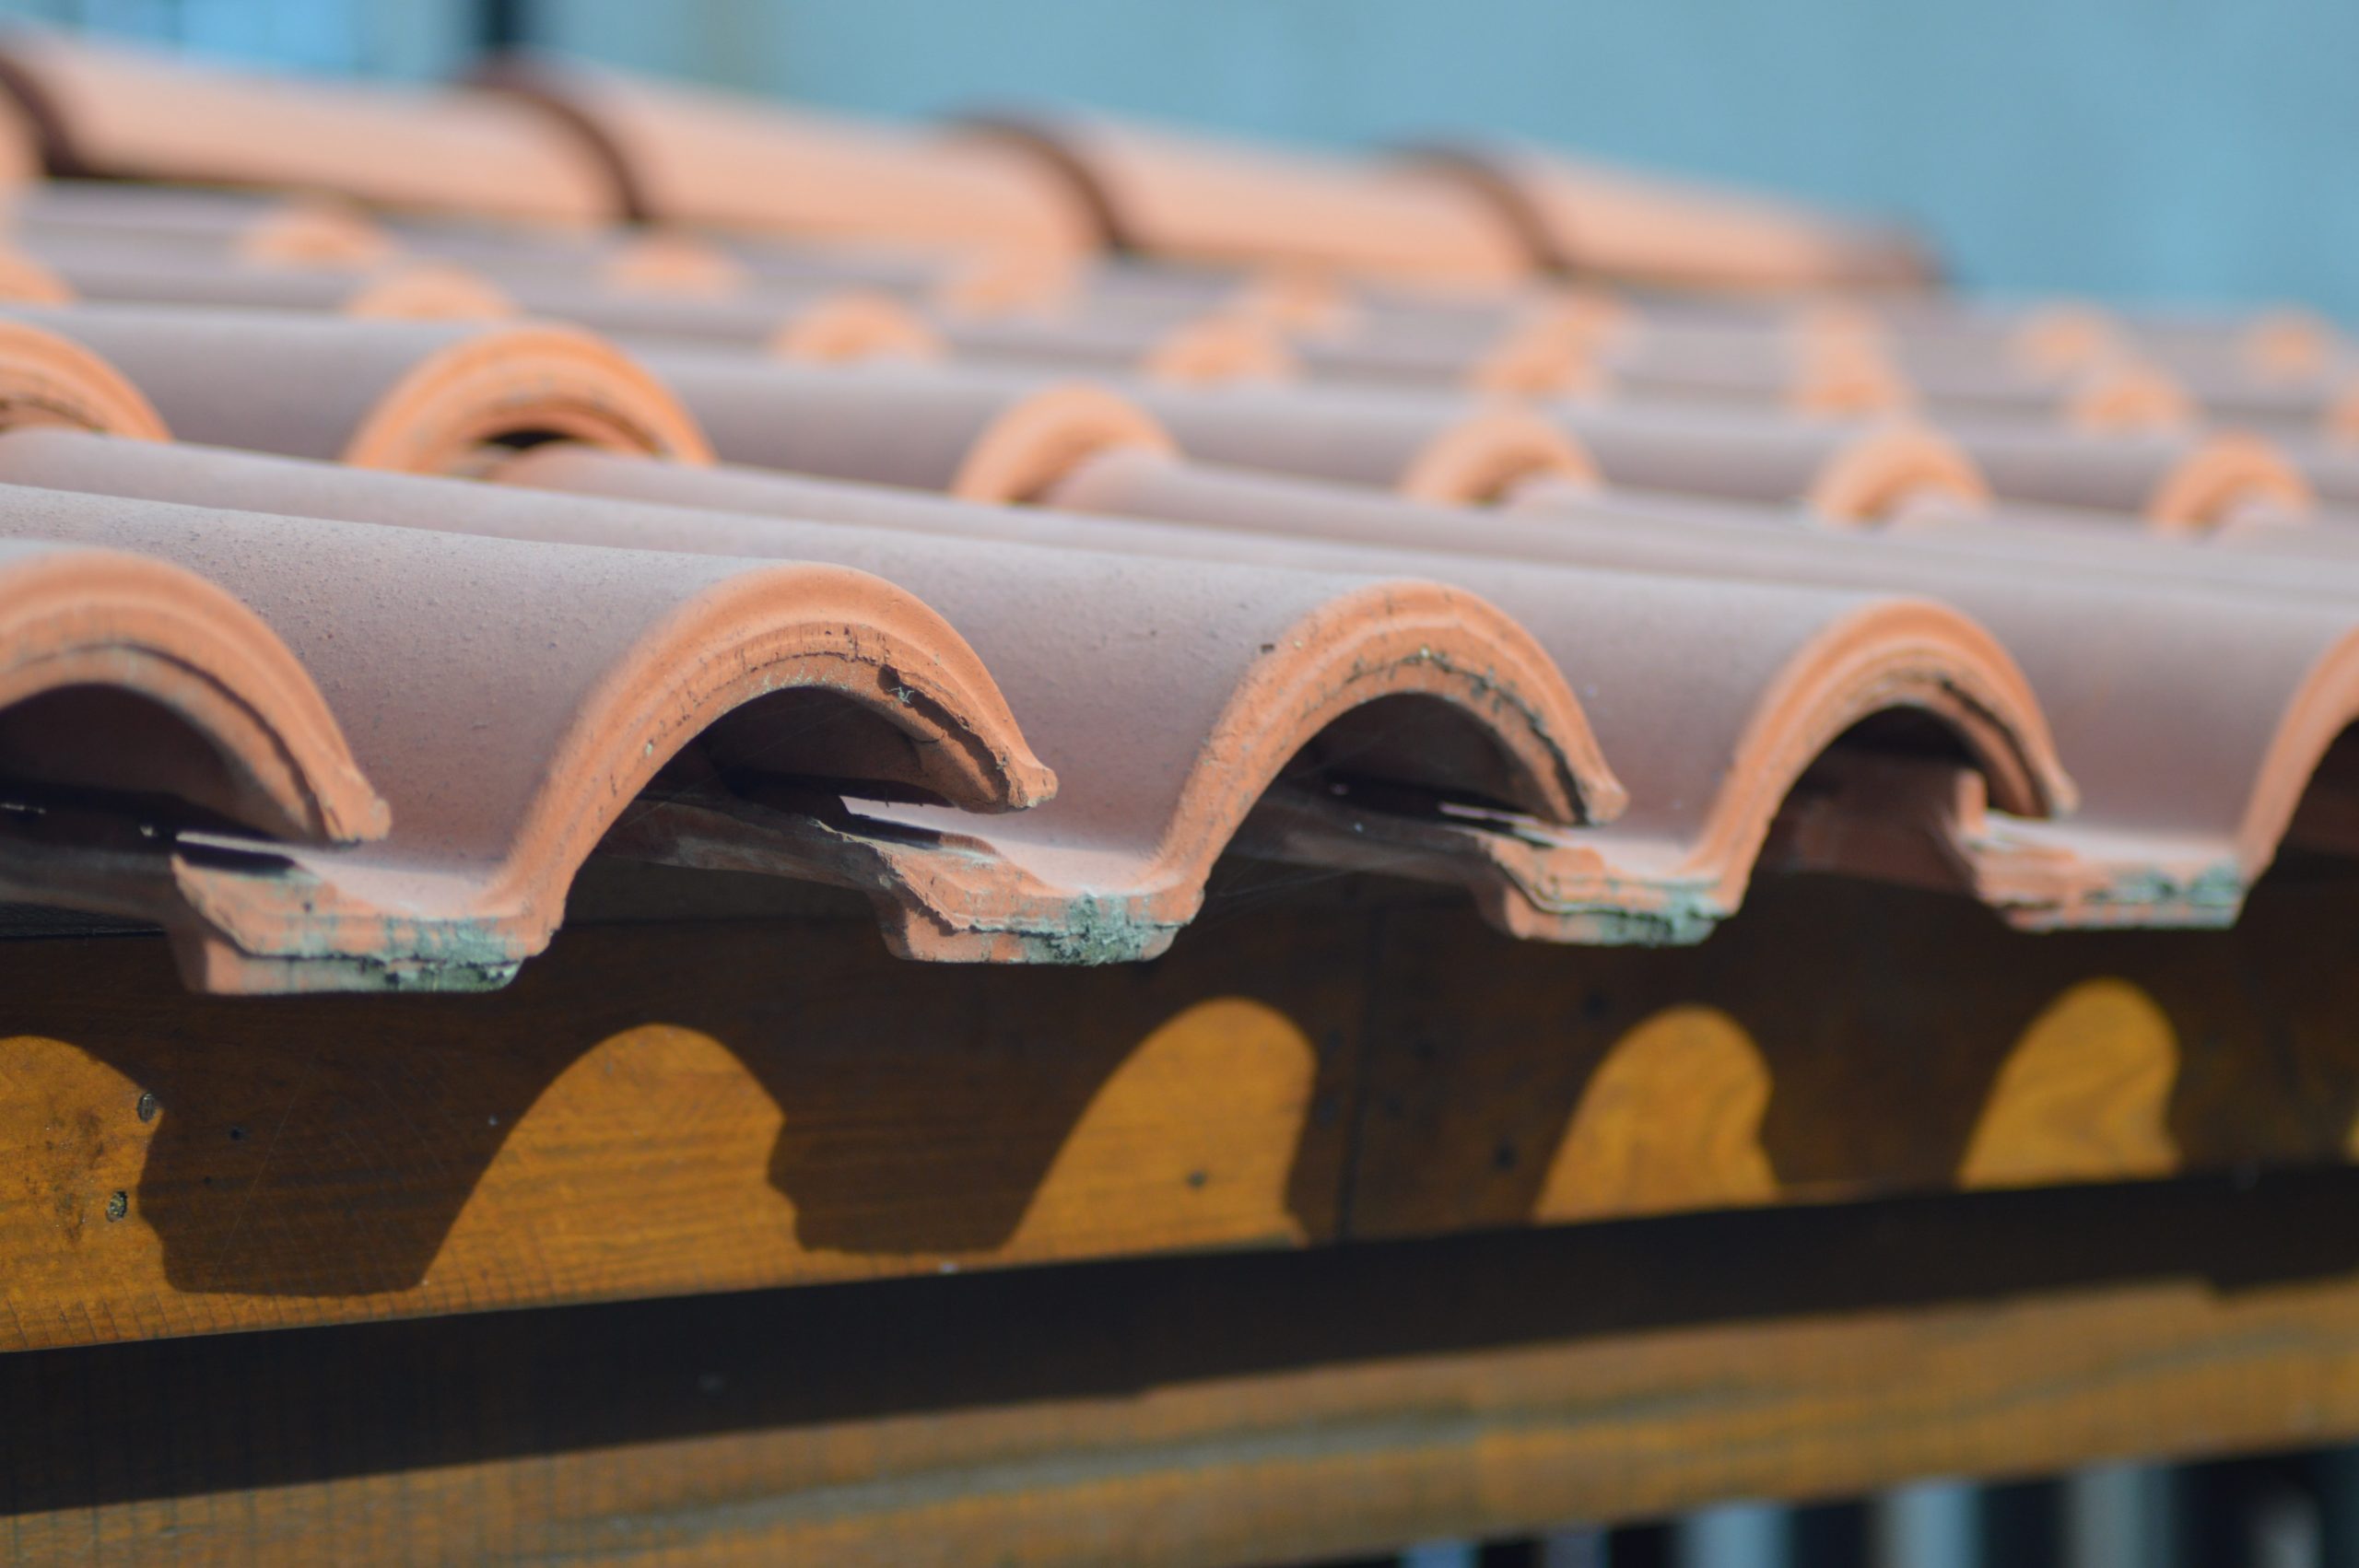 Roof tiles, which are currently among the construction materials in short supply